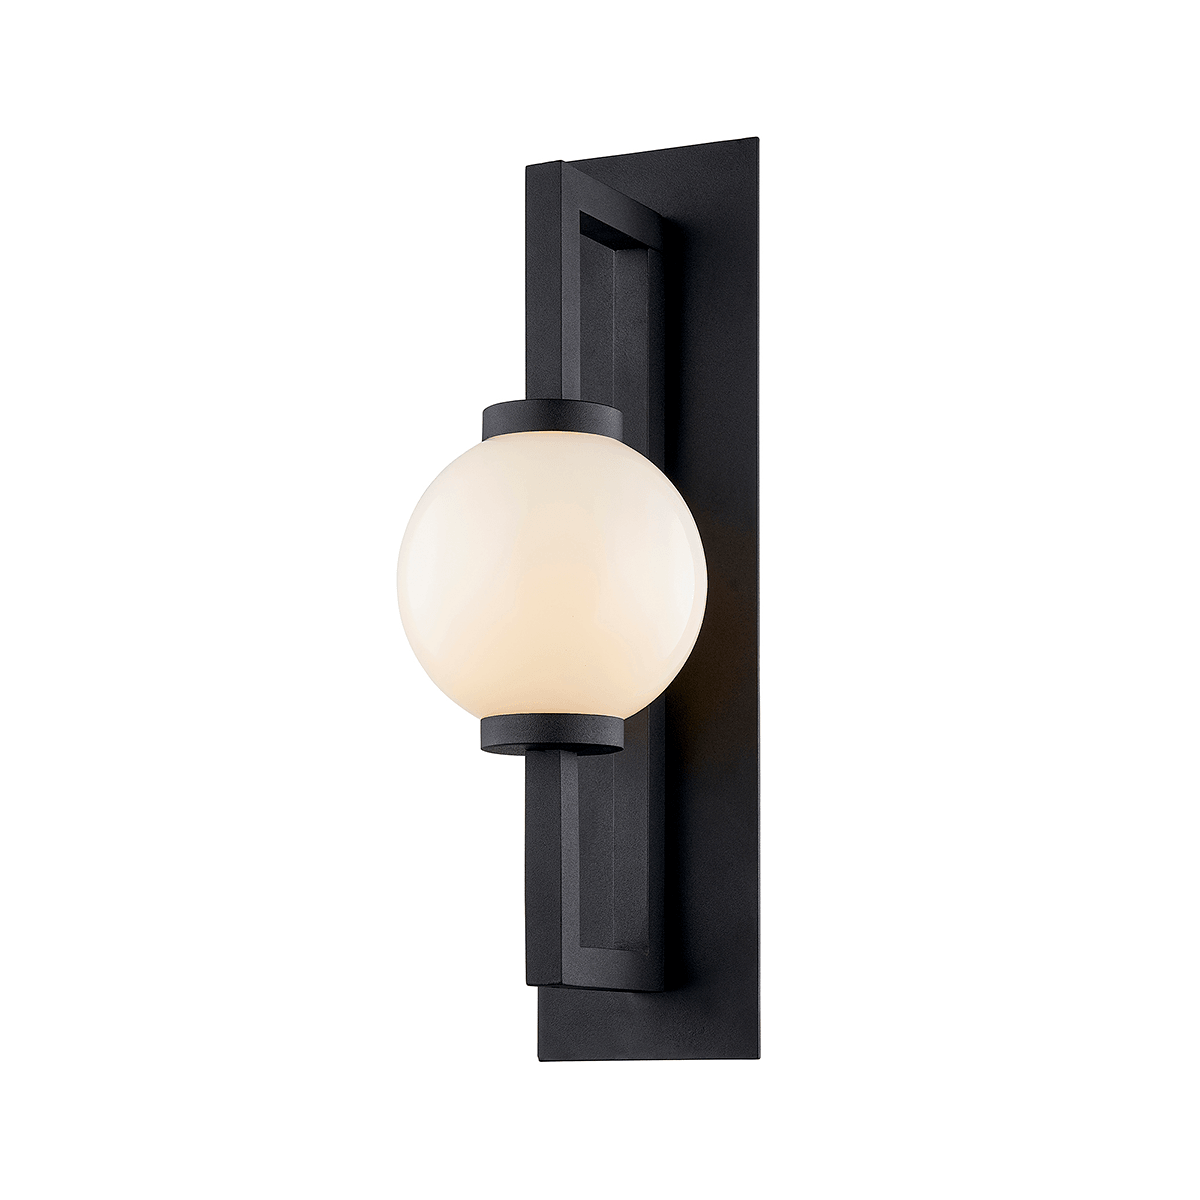 Textured Black Frame with Opal White Glass Globe Shade Outdoor Wall Sconce - LV LIGHTING